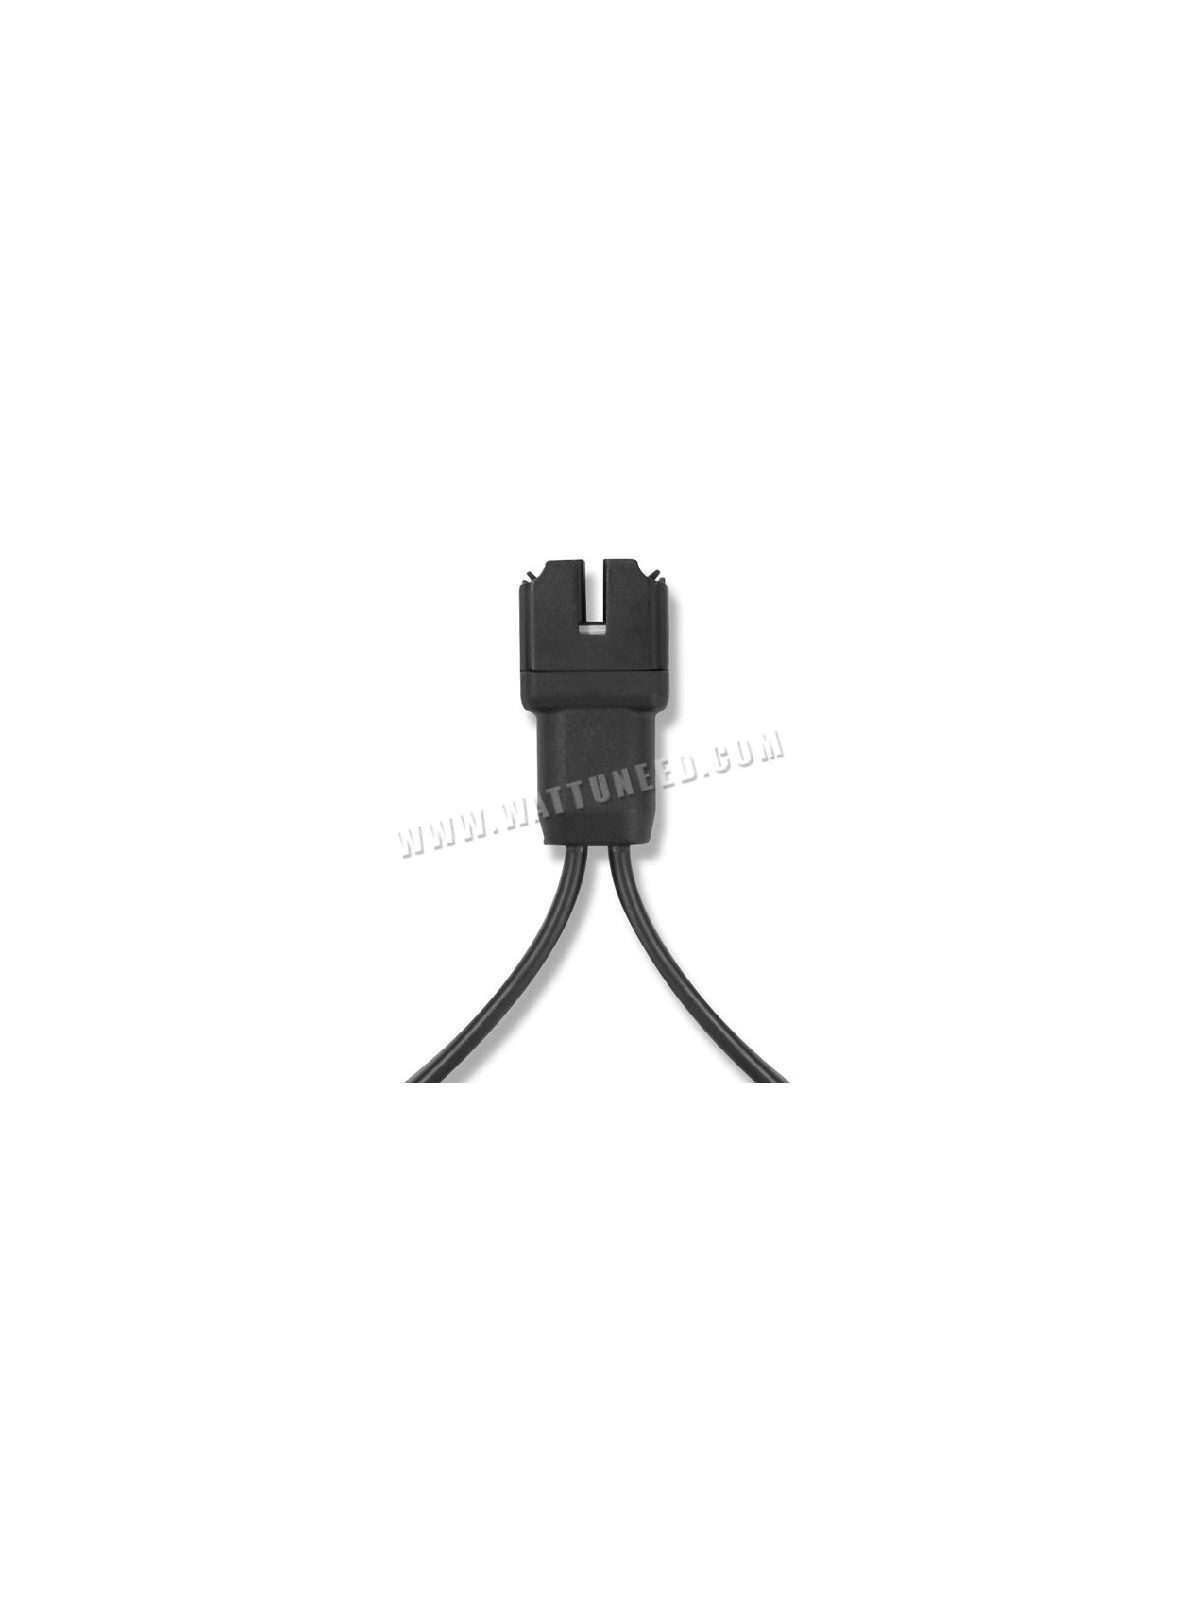 Enphase IQ Cable